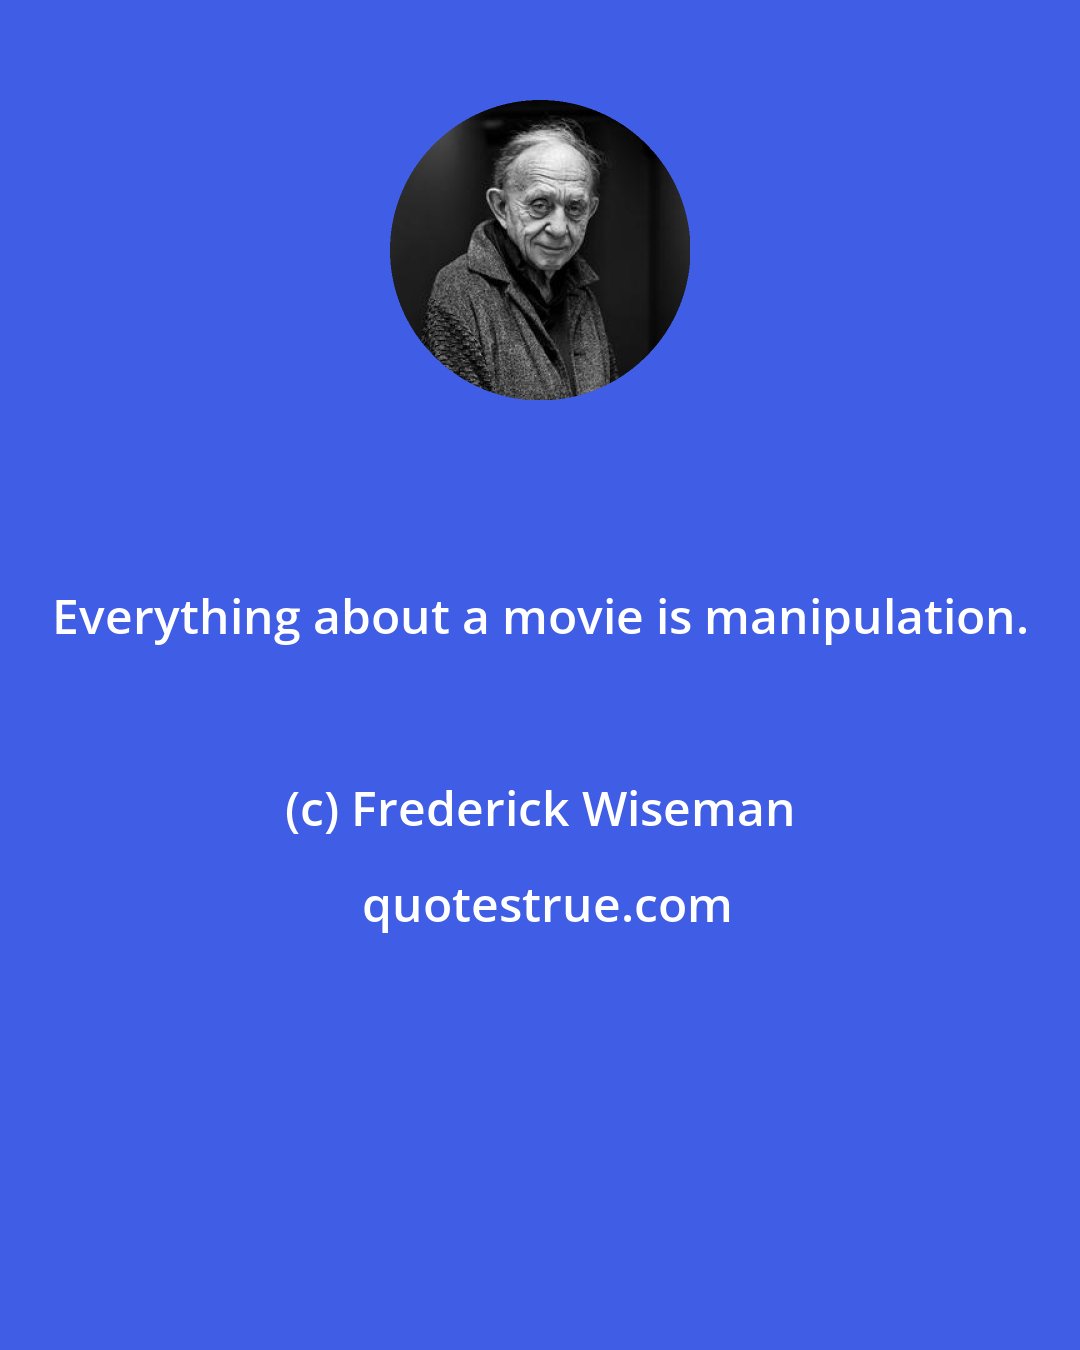 Frederick Wiseman: Everything about a movie is manipulation.